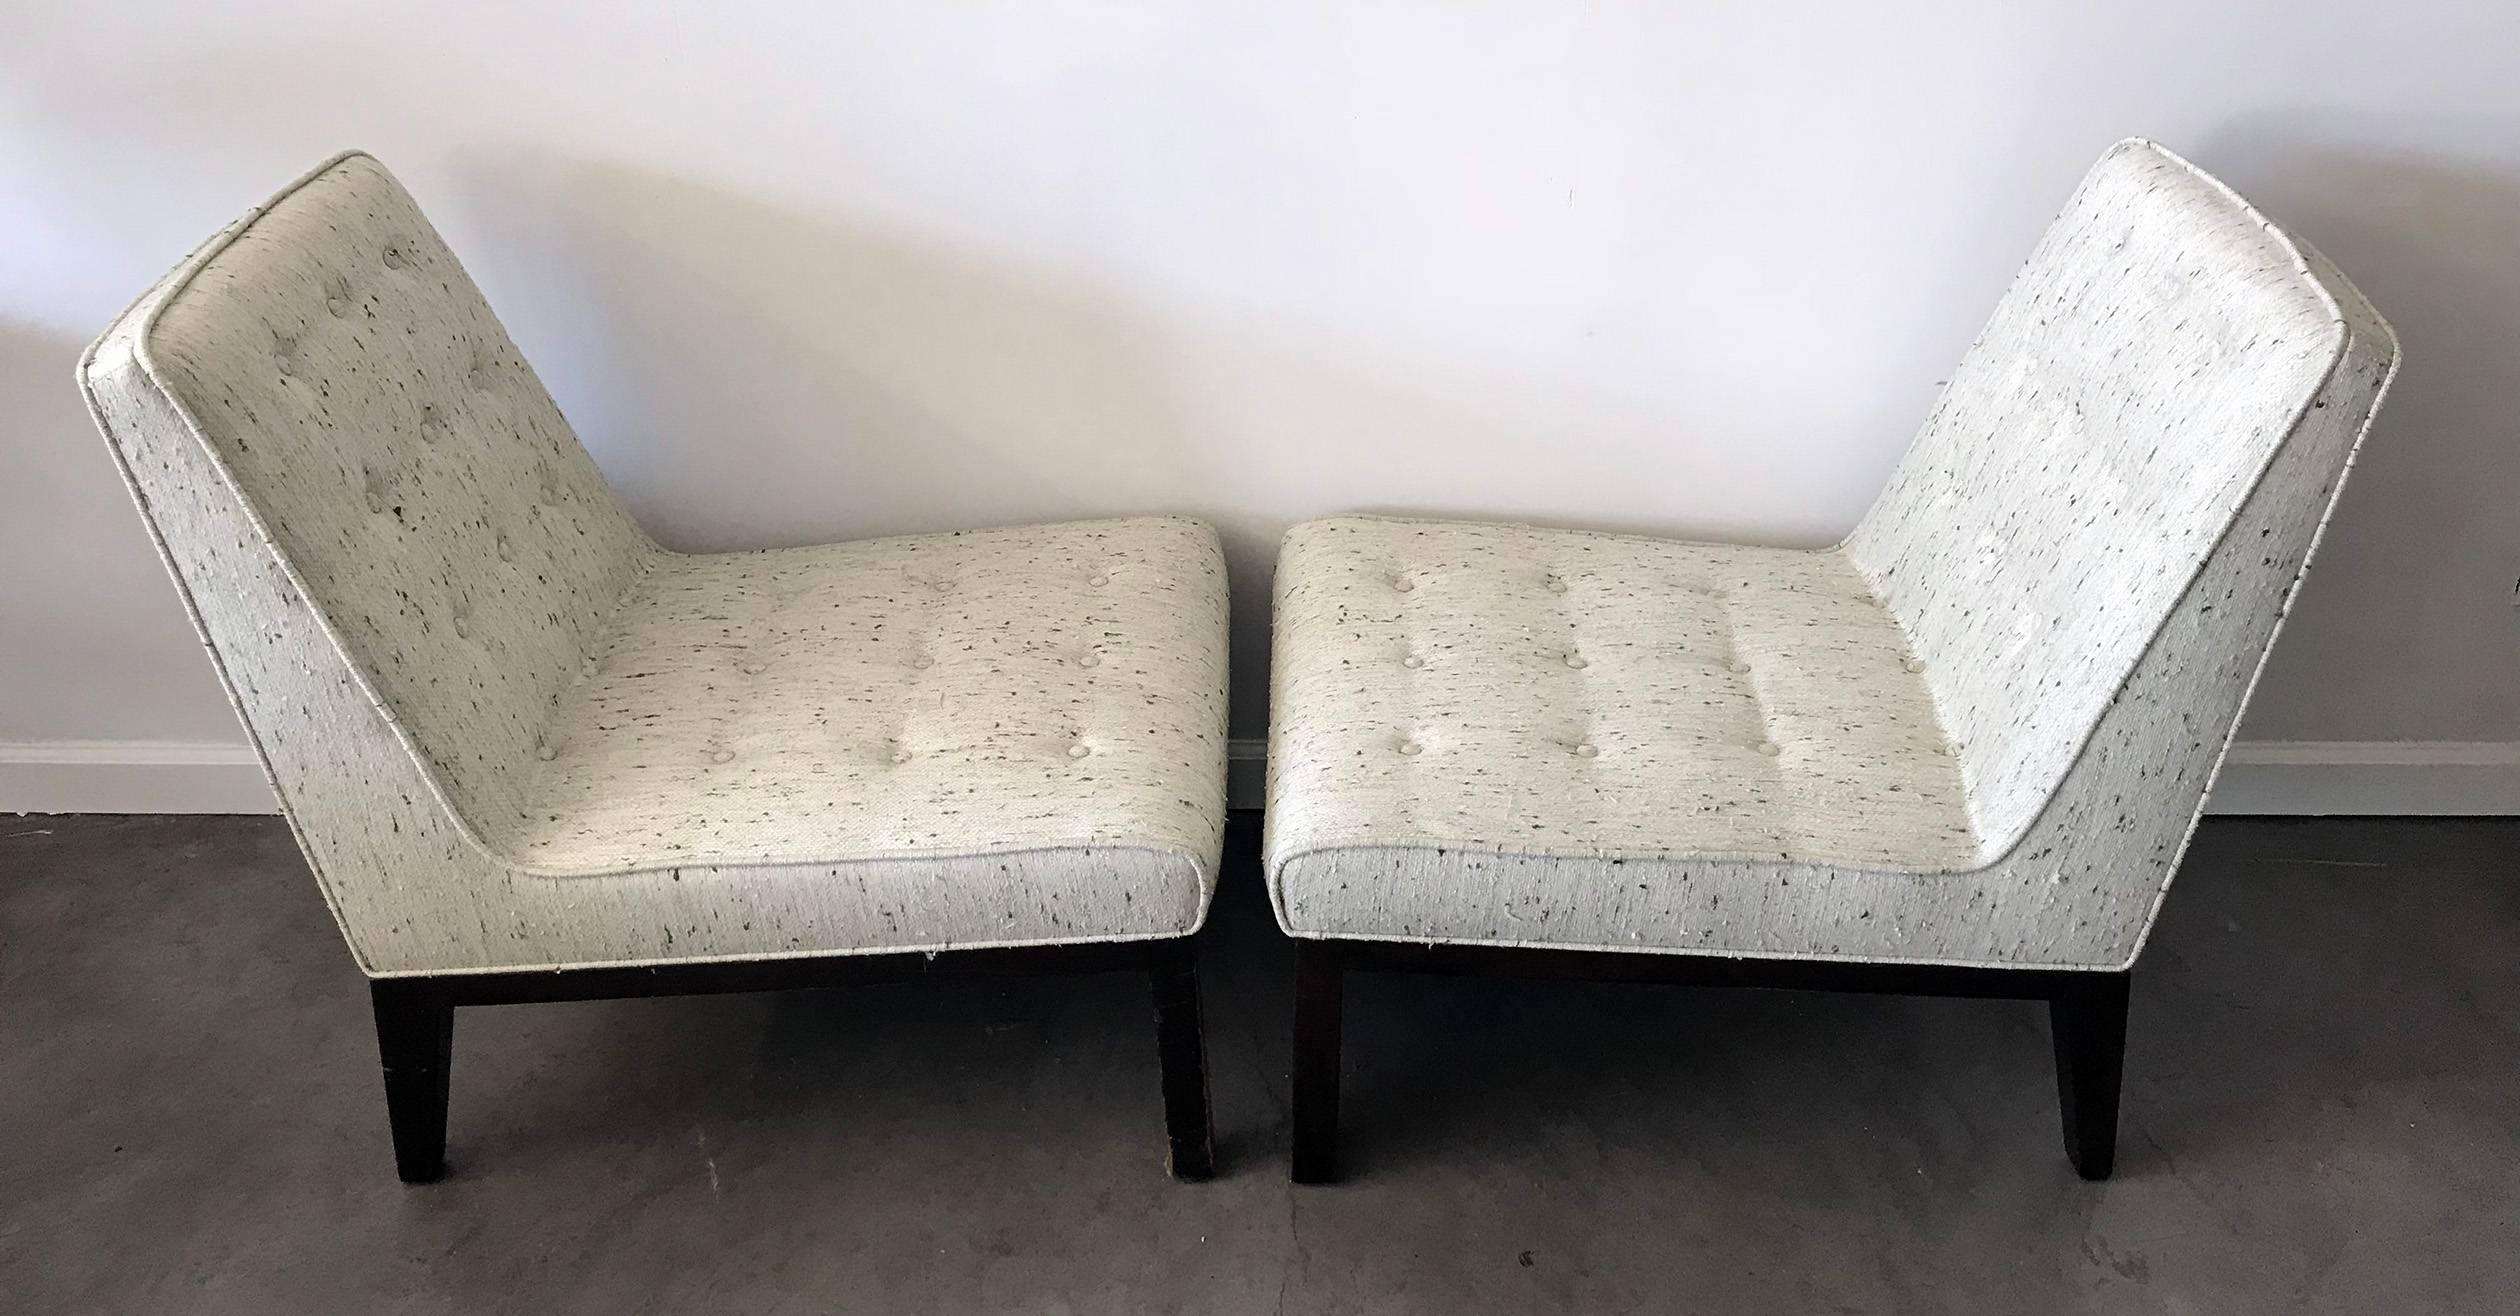 An absolutely stunning pair of slipper chairs by Edward Wormley for Dunbar! These vintage chairs have been freshly reupholstered in a new-old-stock nubby fabric that is a cream color with green flecks. The legs / framing of the chair has not been